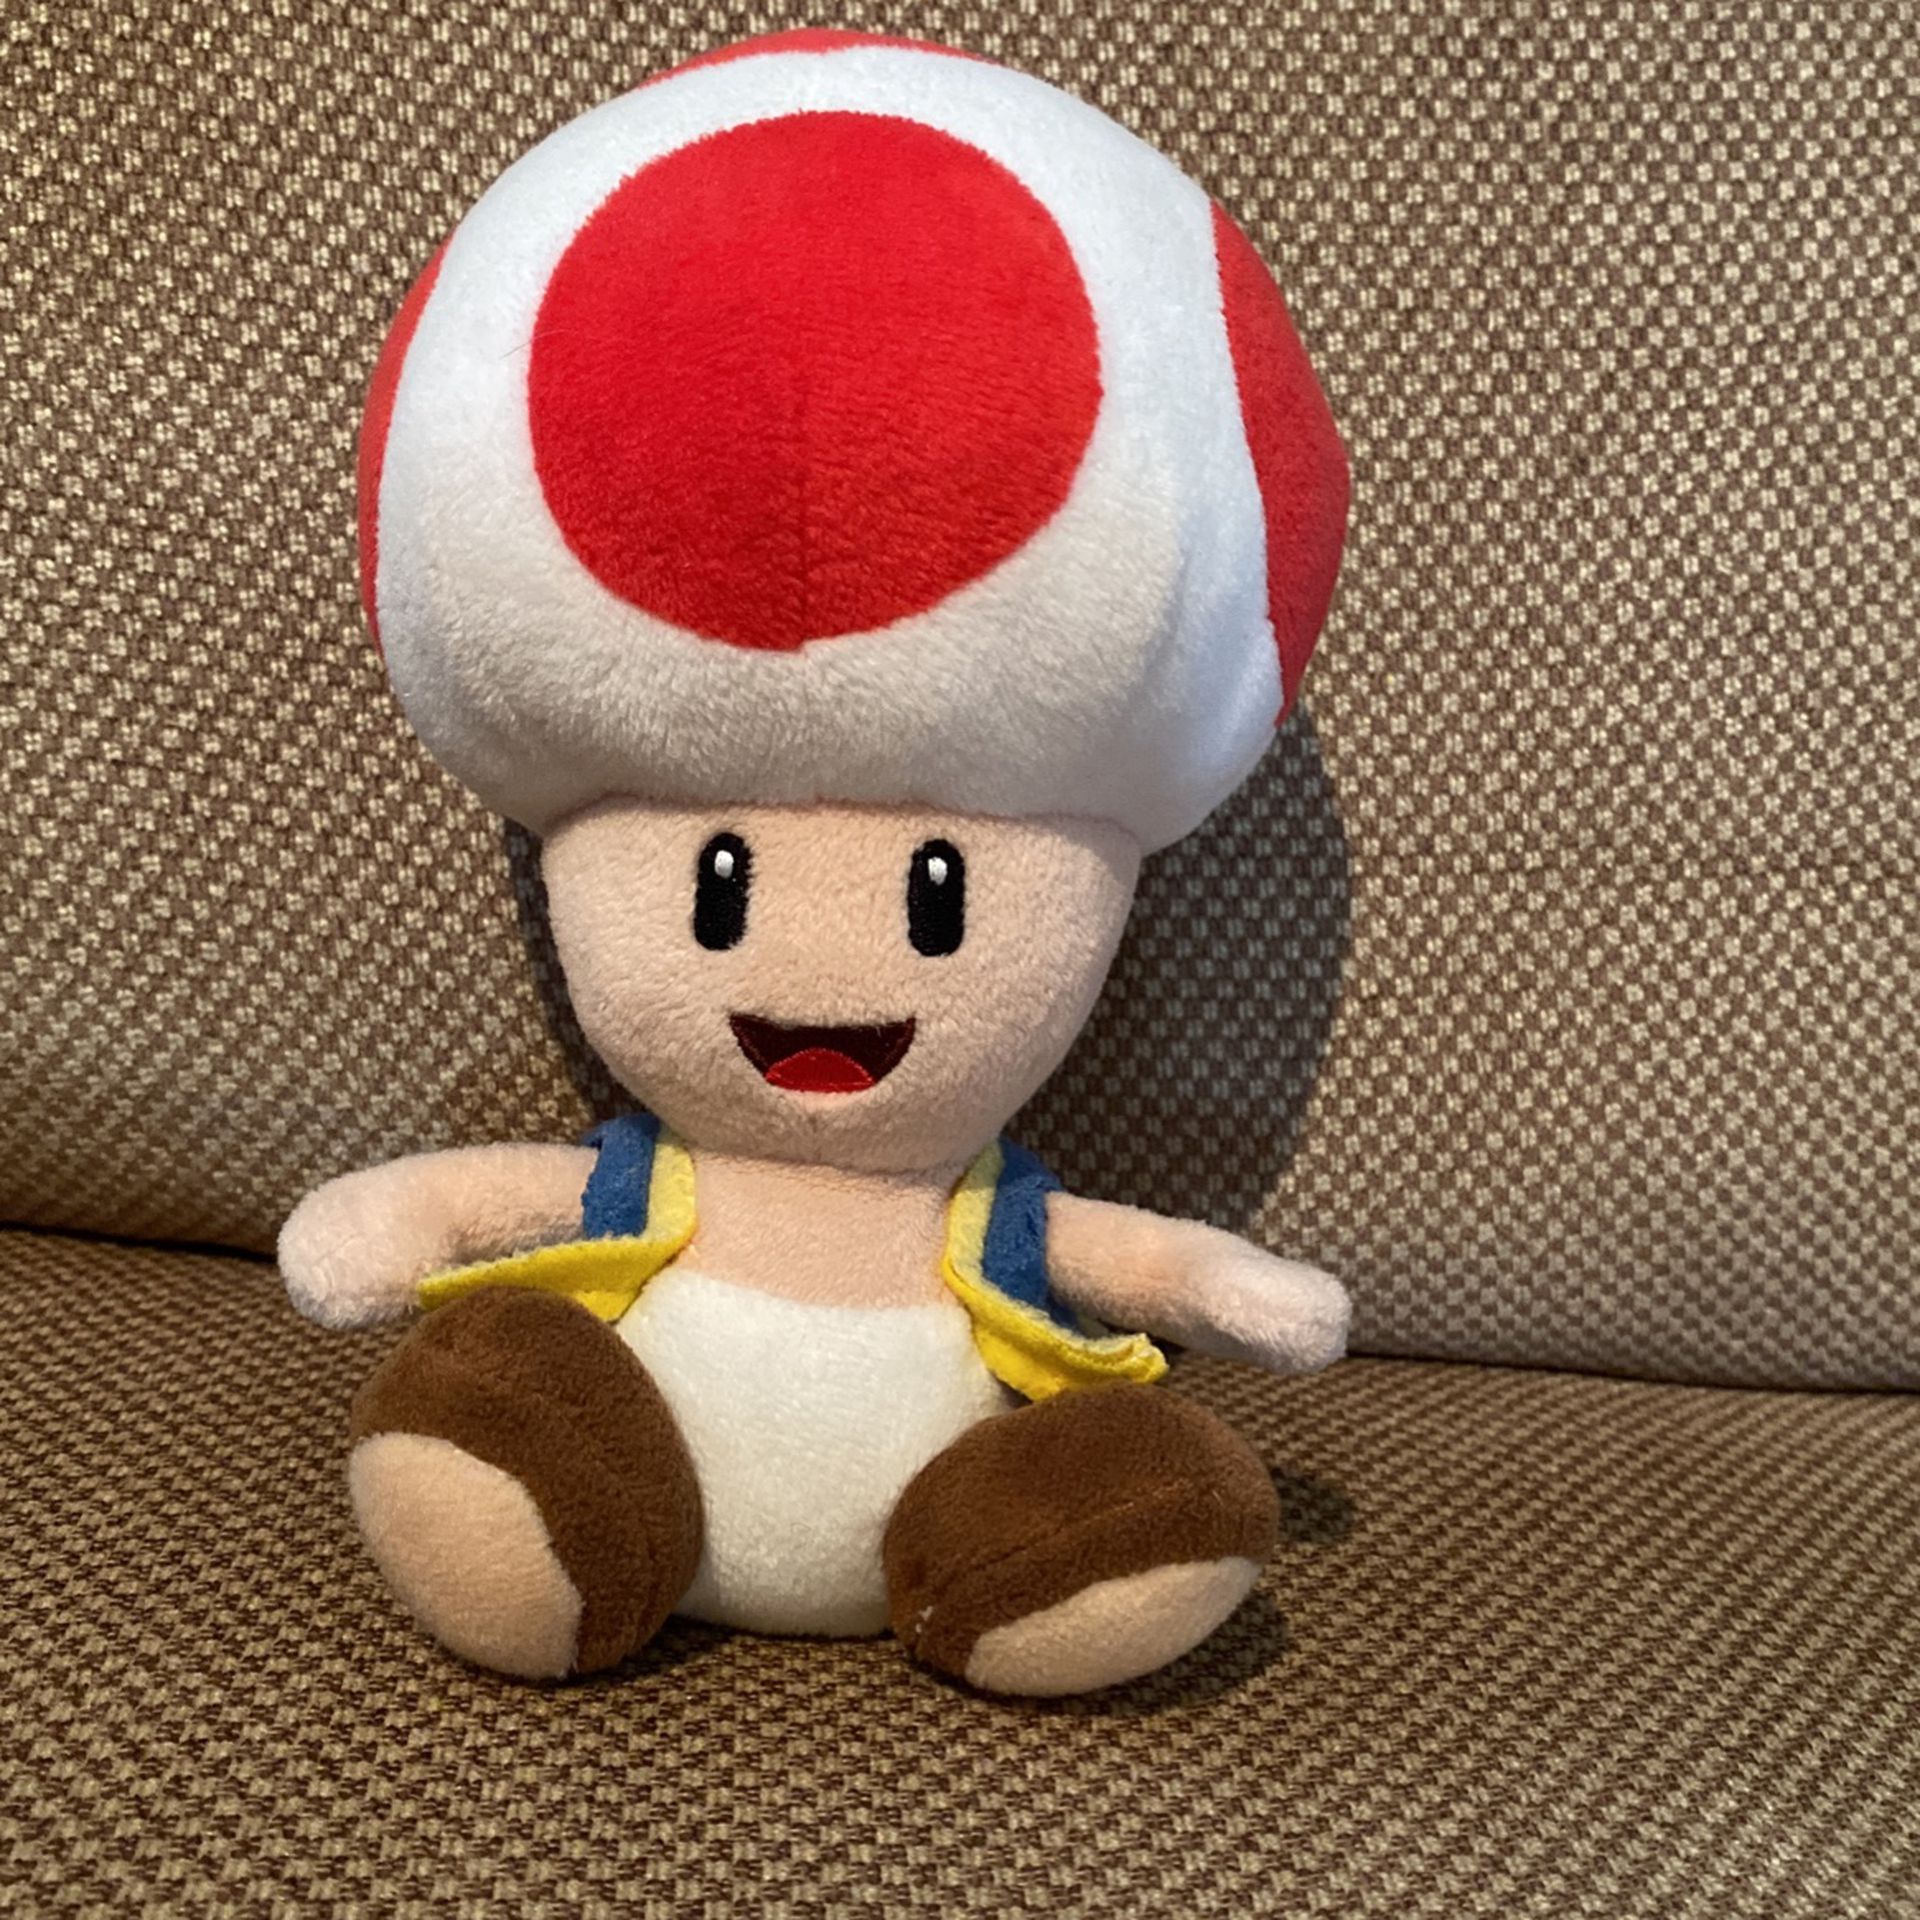 Super Mario Bros Red Toad Plush for Sale in Glendale Heights, IL - OfferUp